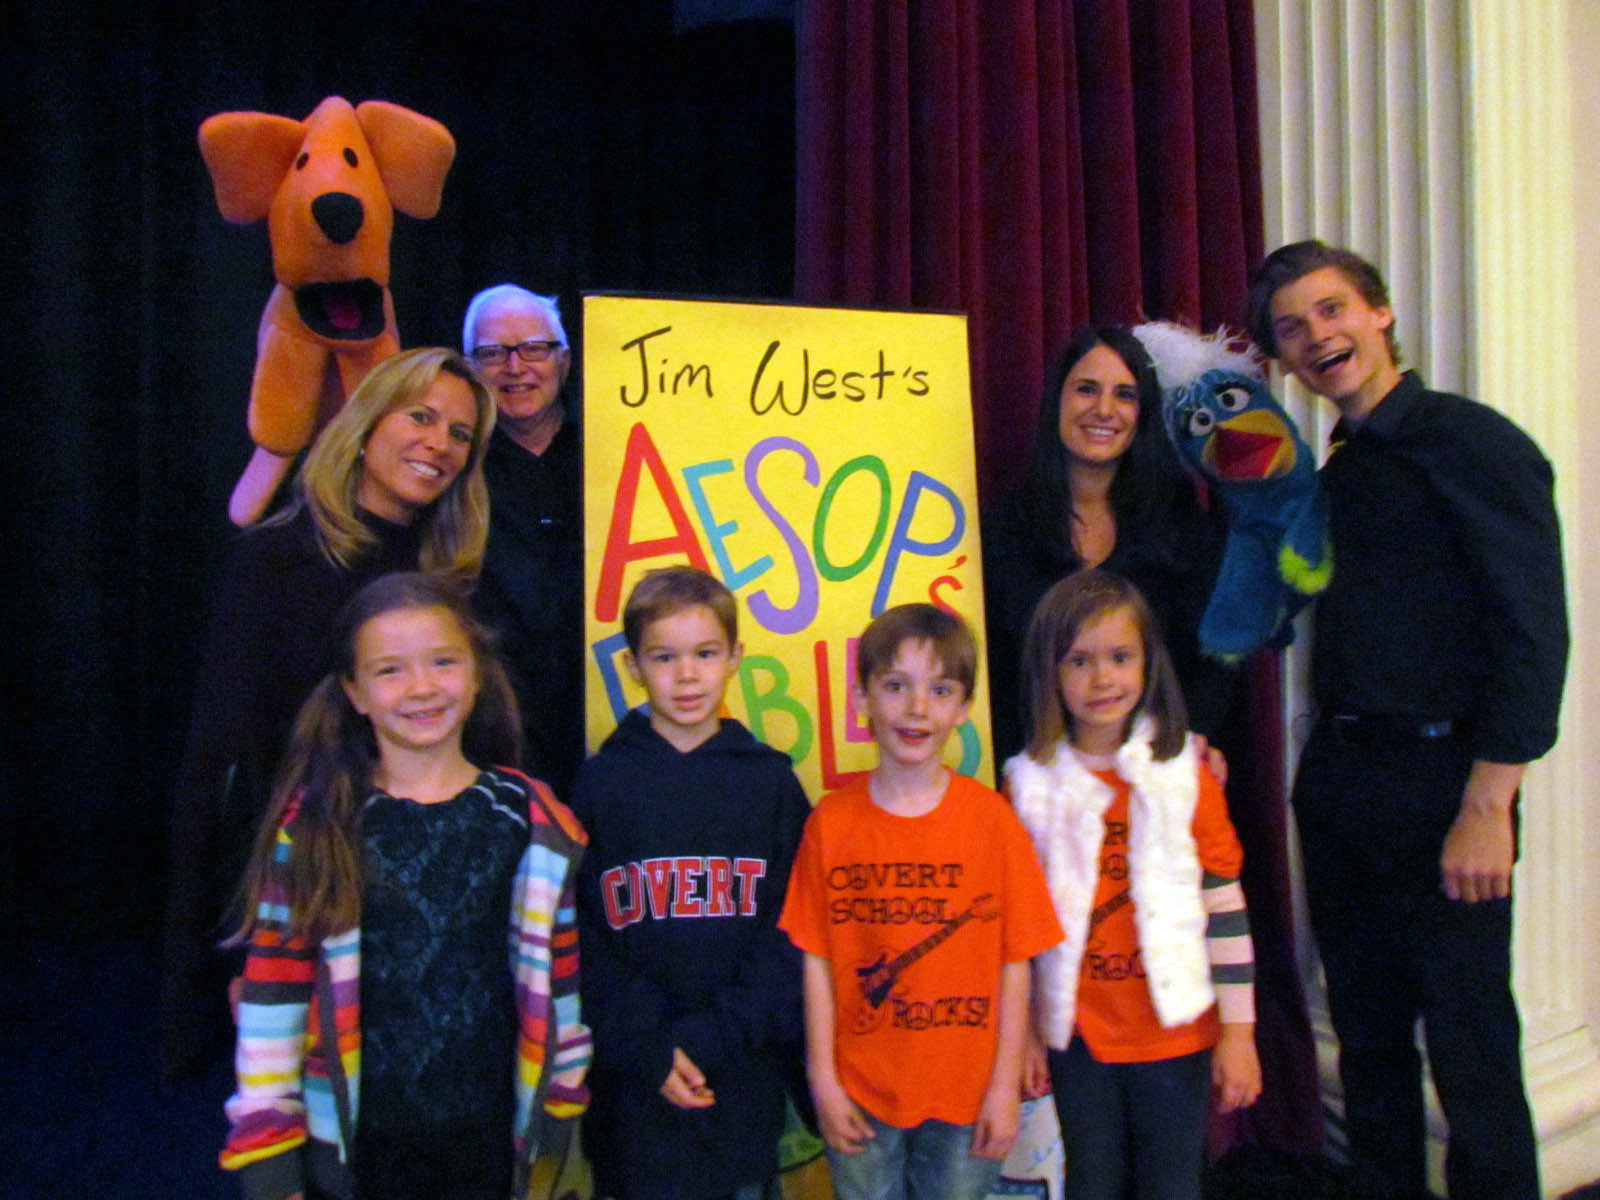 Teachers Valerie Sprague and Antoinette Morgan, and first graders Julie Coles, Joshua DePaoli, Connor Erickson and Liana McCarthy posed with puppeteers Jim West and Ian Antal before the show.